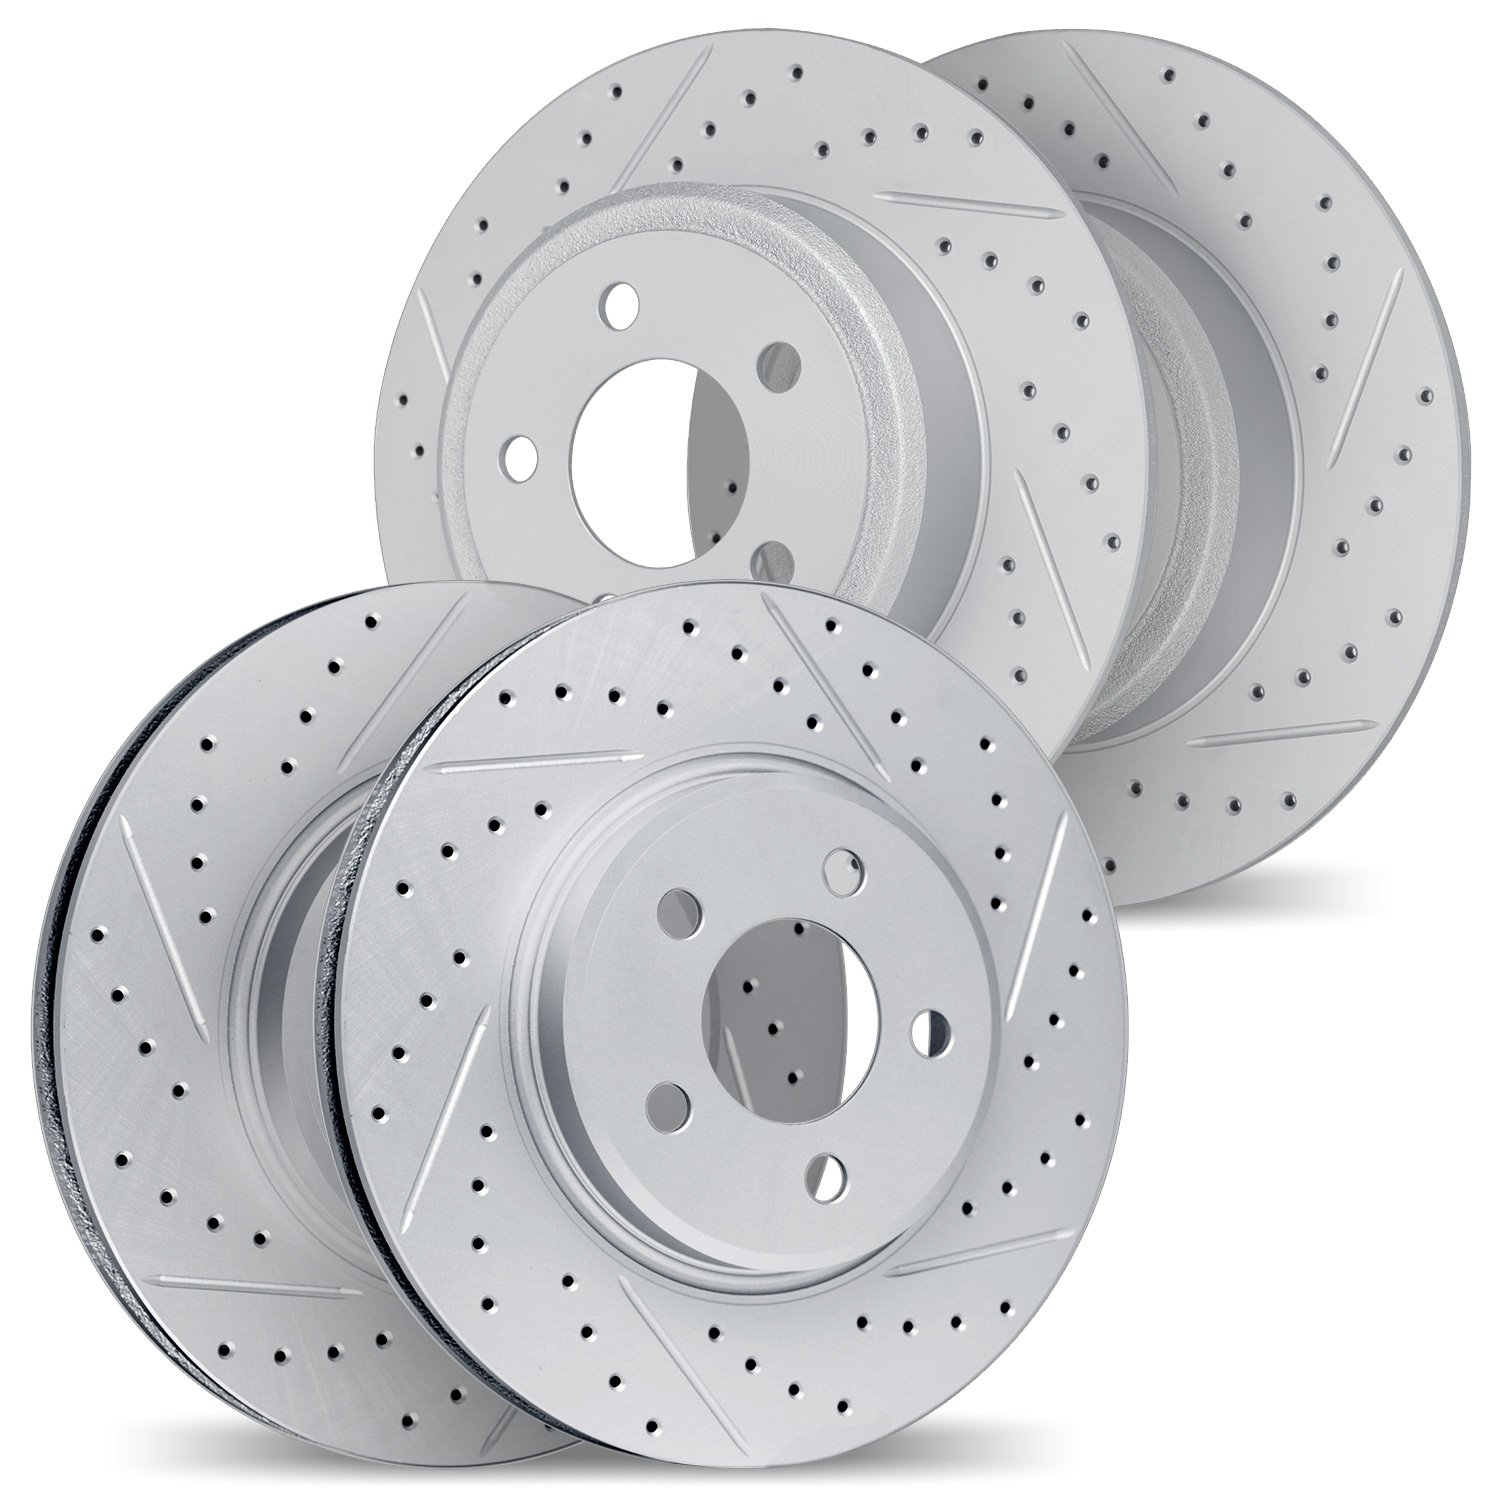 2004-55002 Geoperformance Drilled/Slotted Brake Rotors, 2003-2005 Ford/Lincoln/Mercury/Mazda, Position: Front and Rear